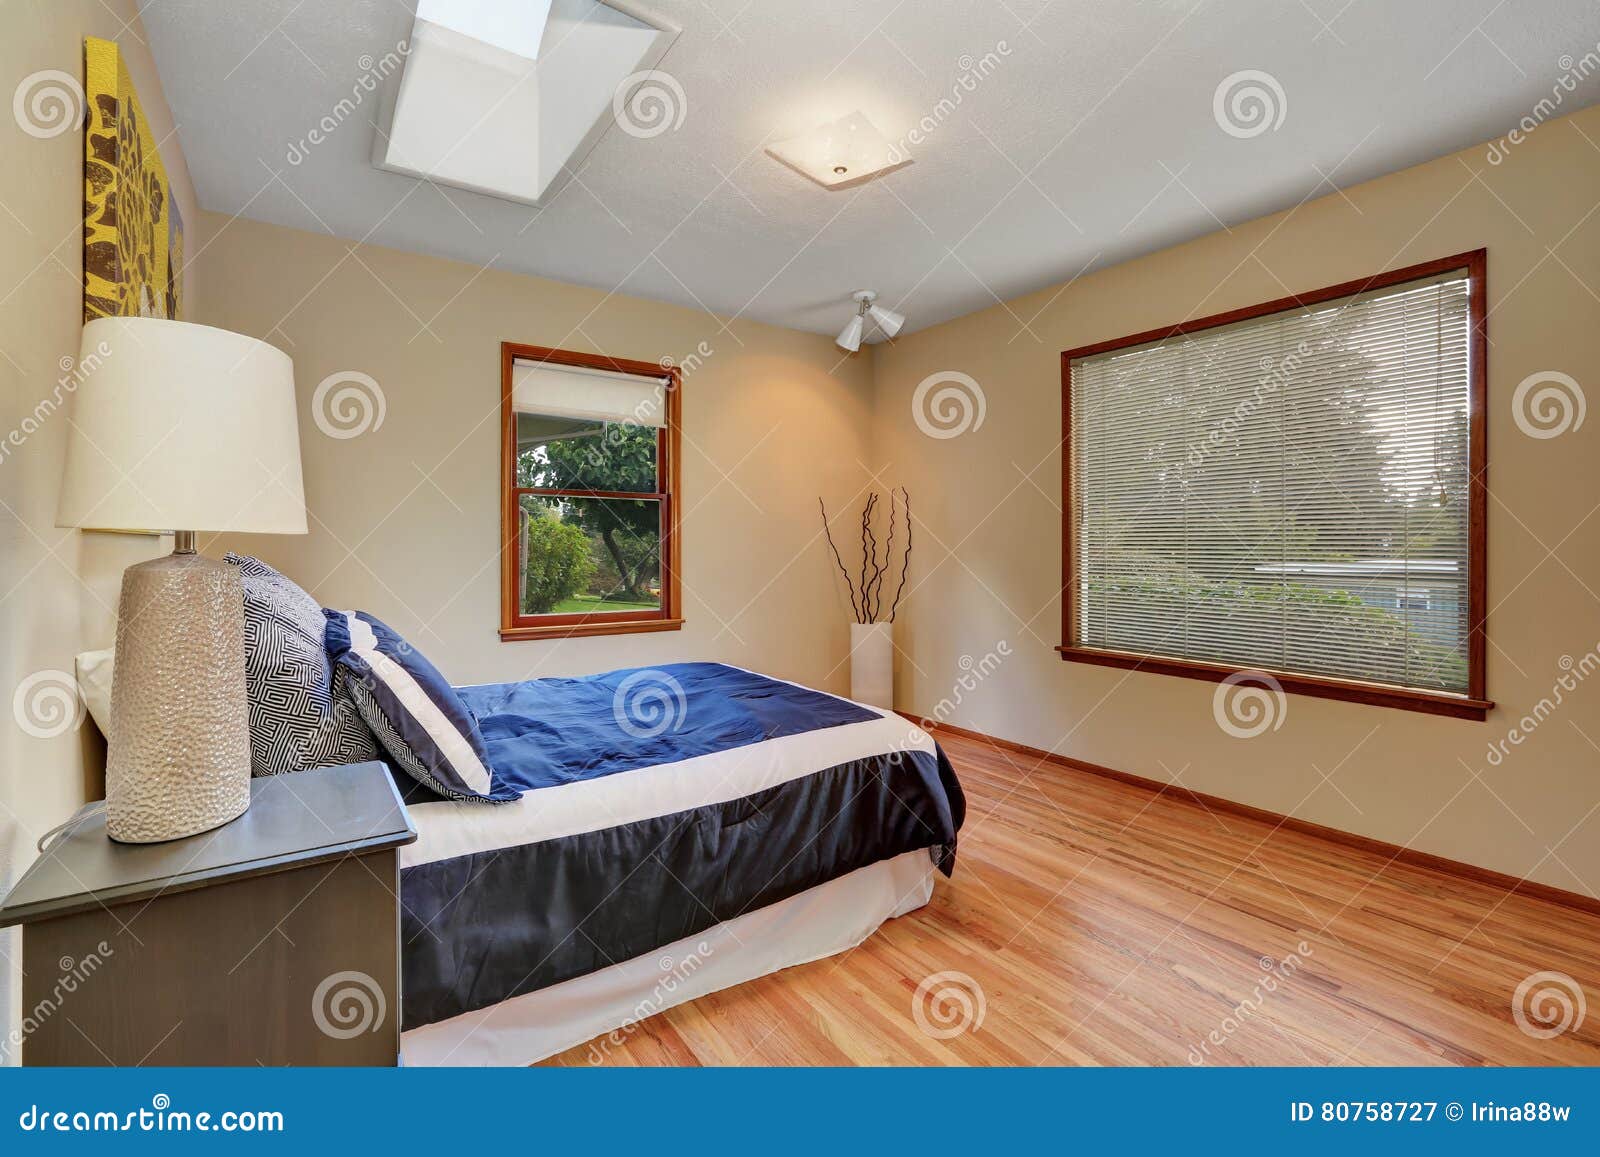 Simply Furnished Bedroom Interior With Hardwood Floor Stock Image